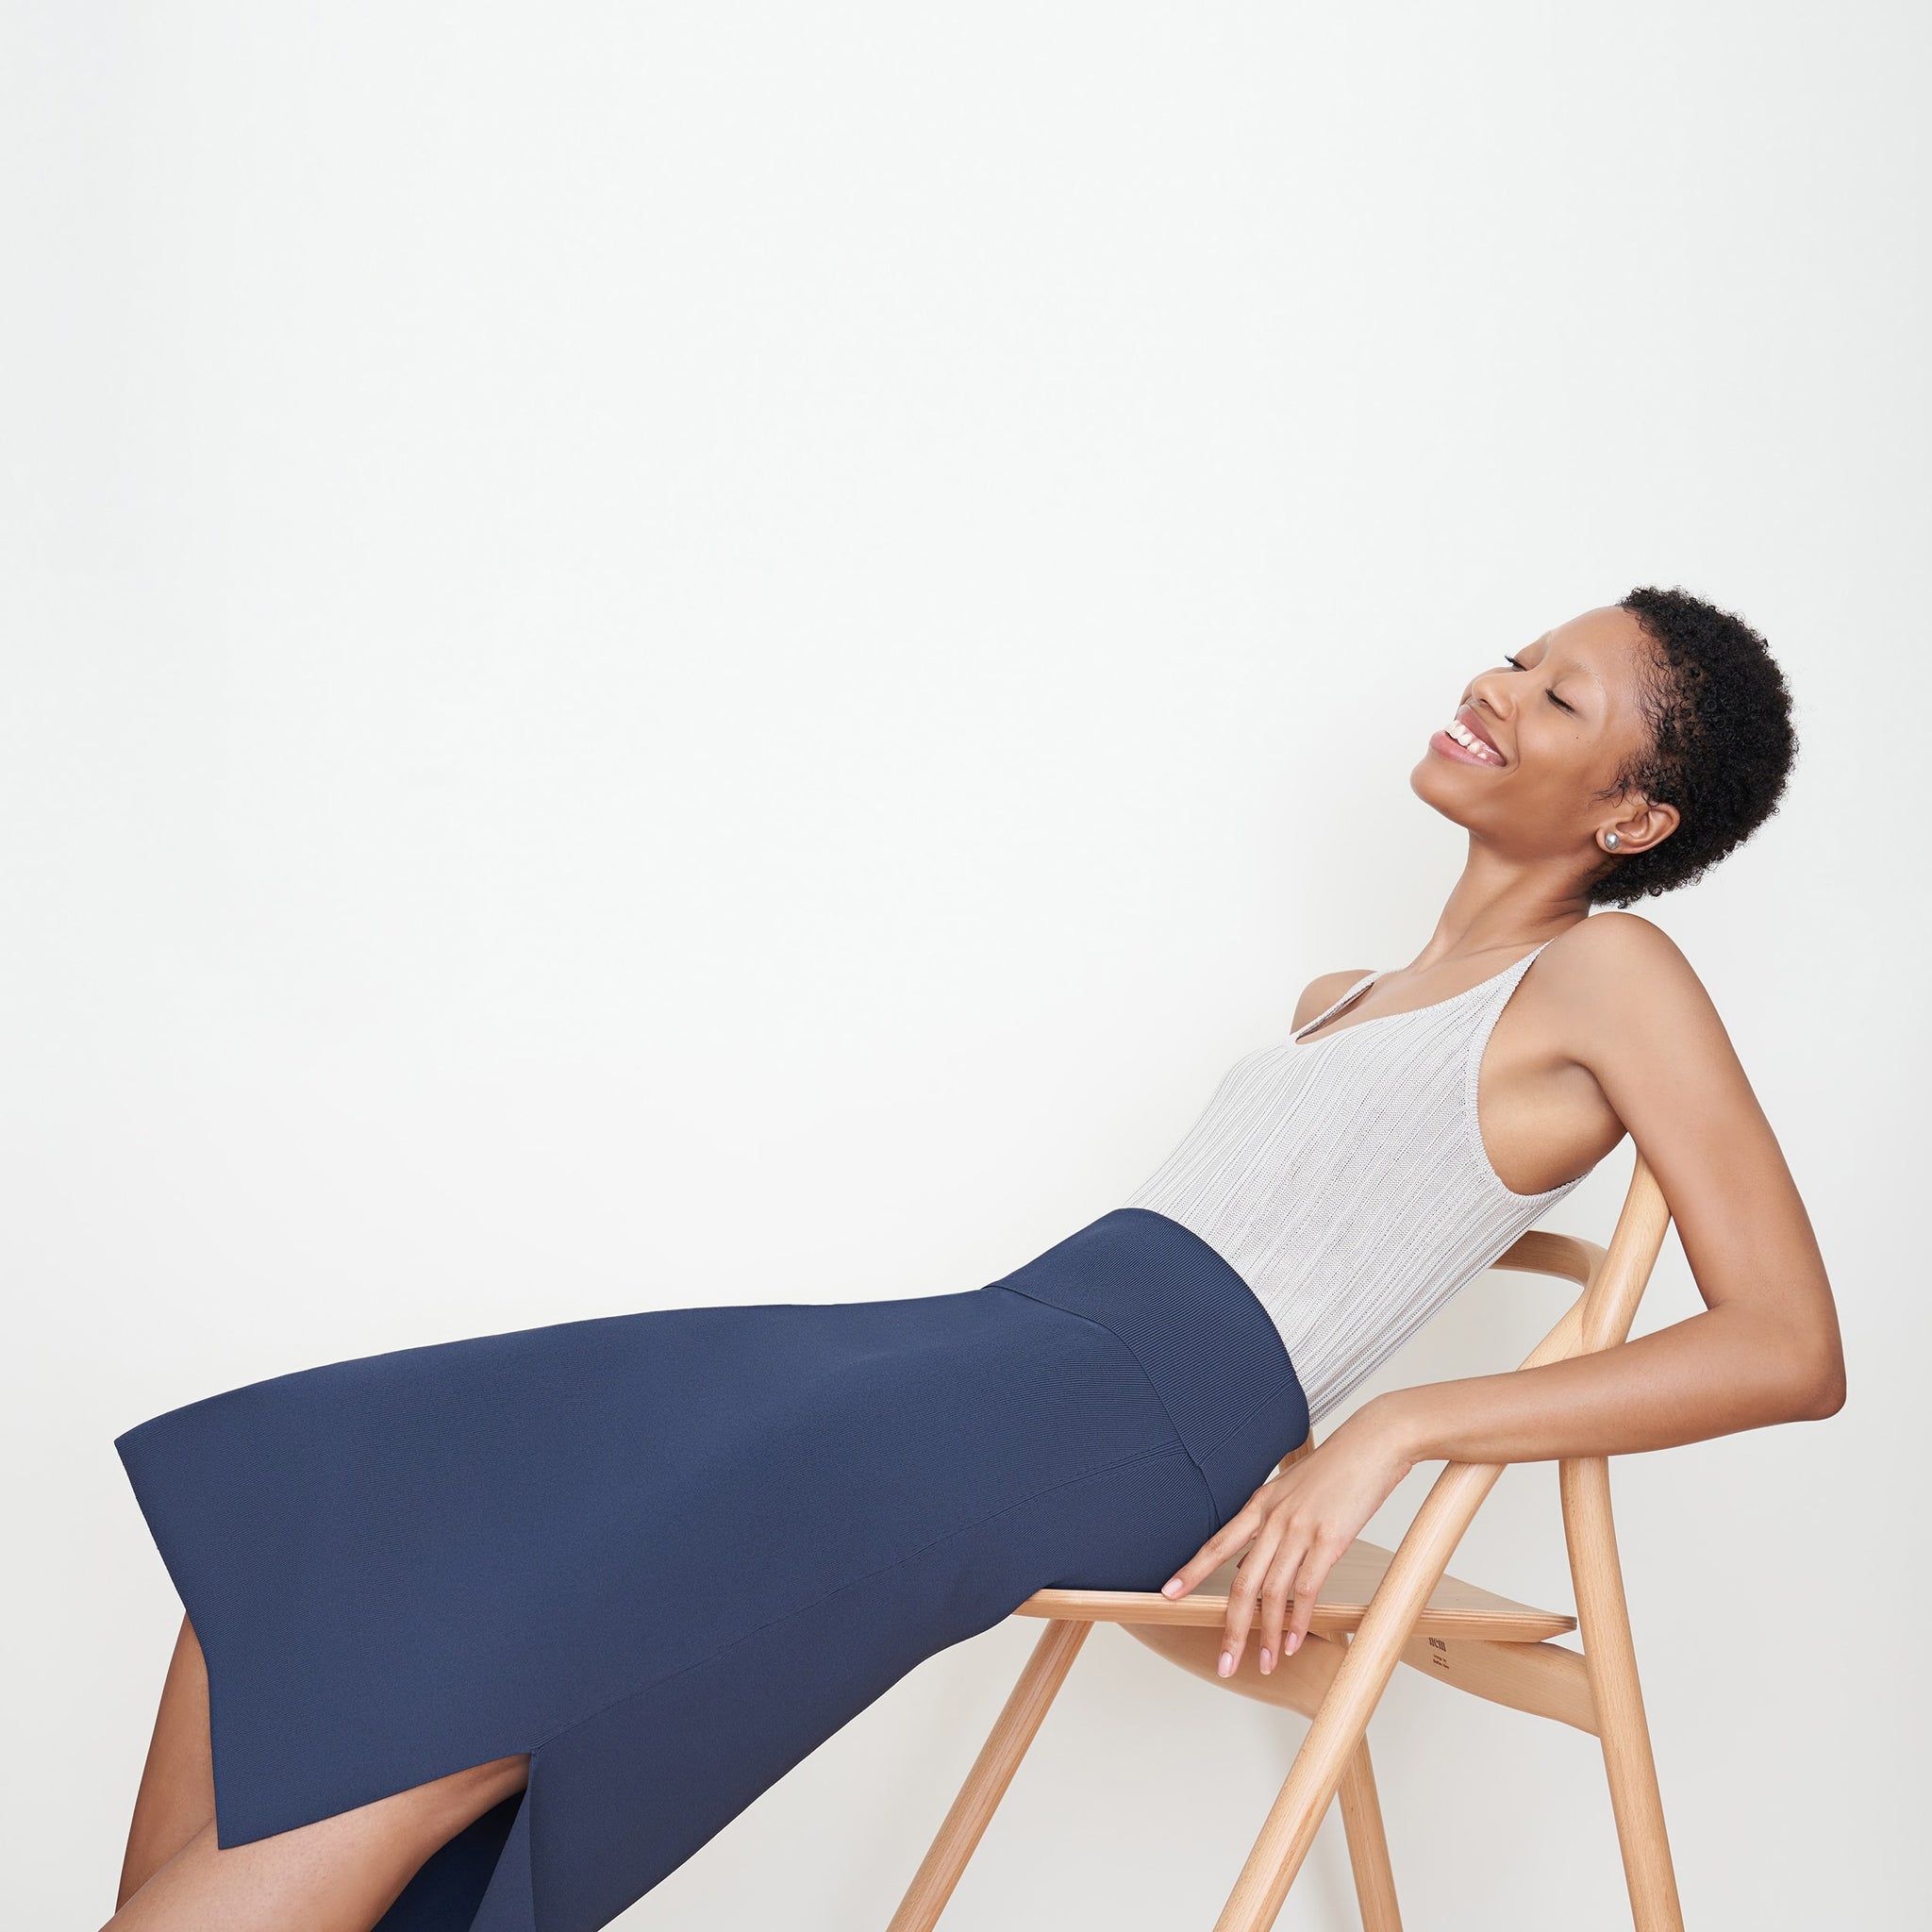 Side image of a woman sitting wearing the Harlem skirt in jardigan knit in Baltic Blue